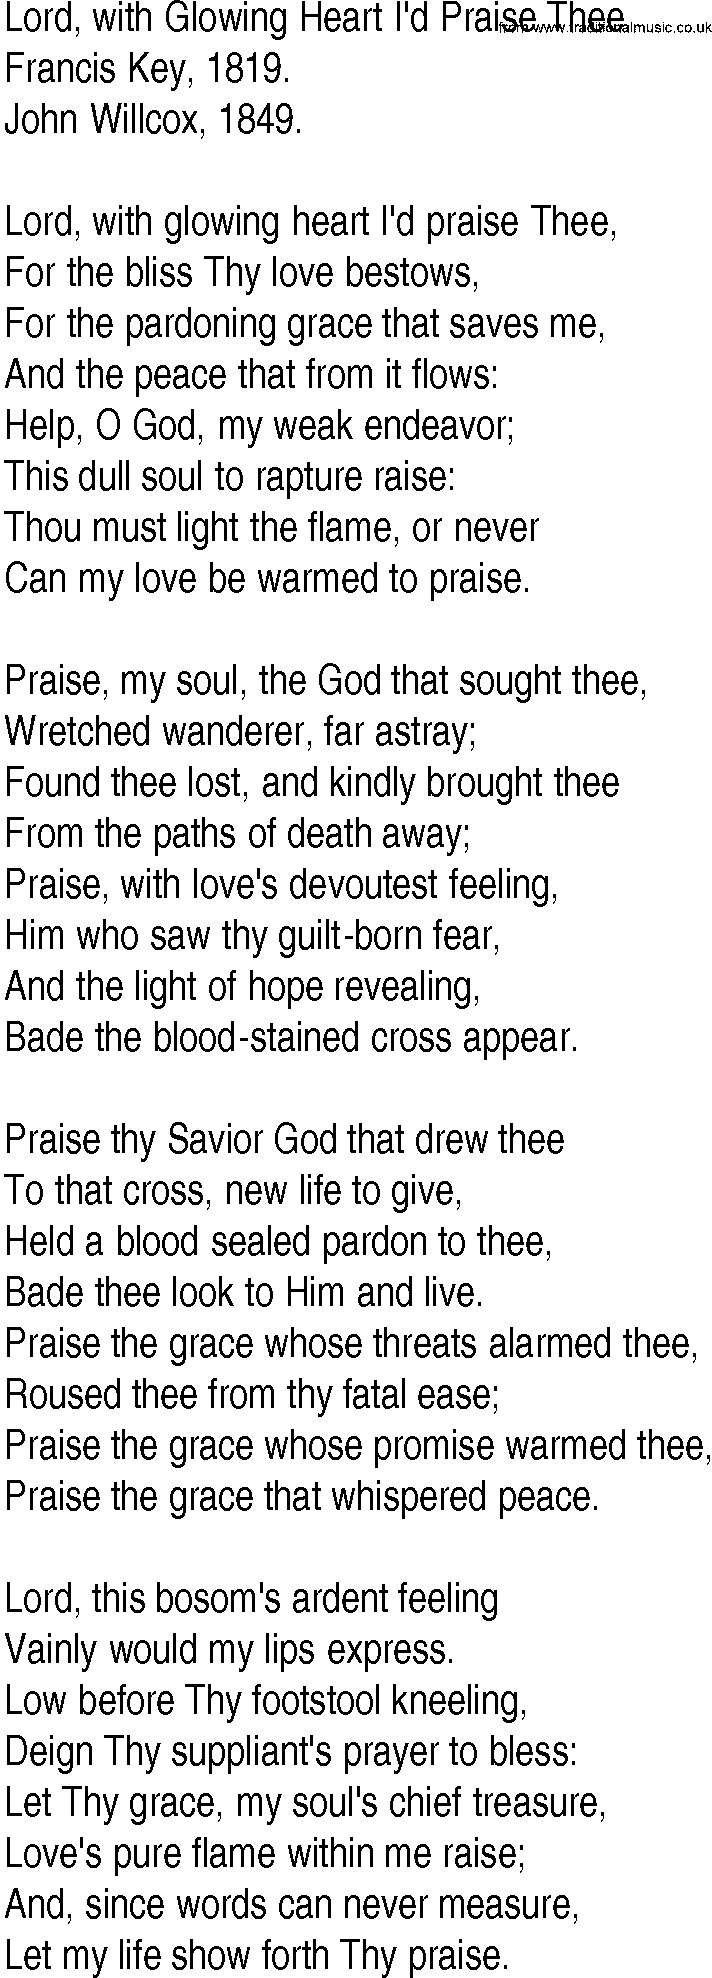 Hymn and Gospel Song: Lord, with Glowing Heart I'd Praise Thee by Francis Key lyrics